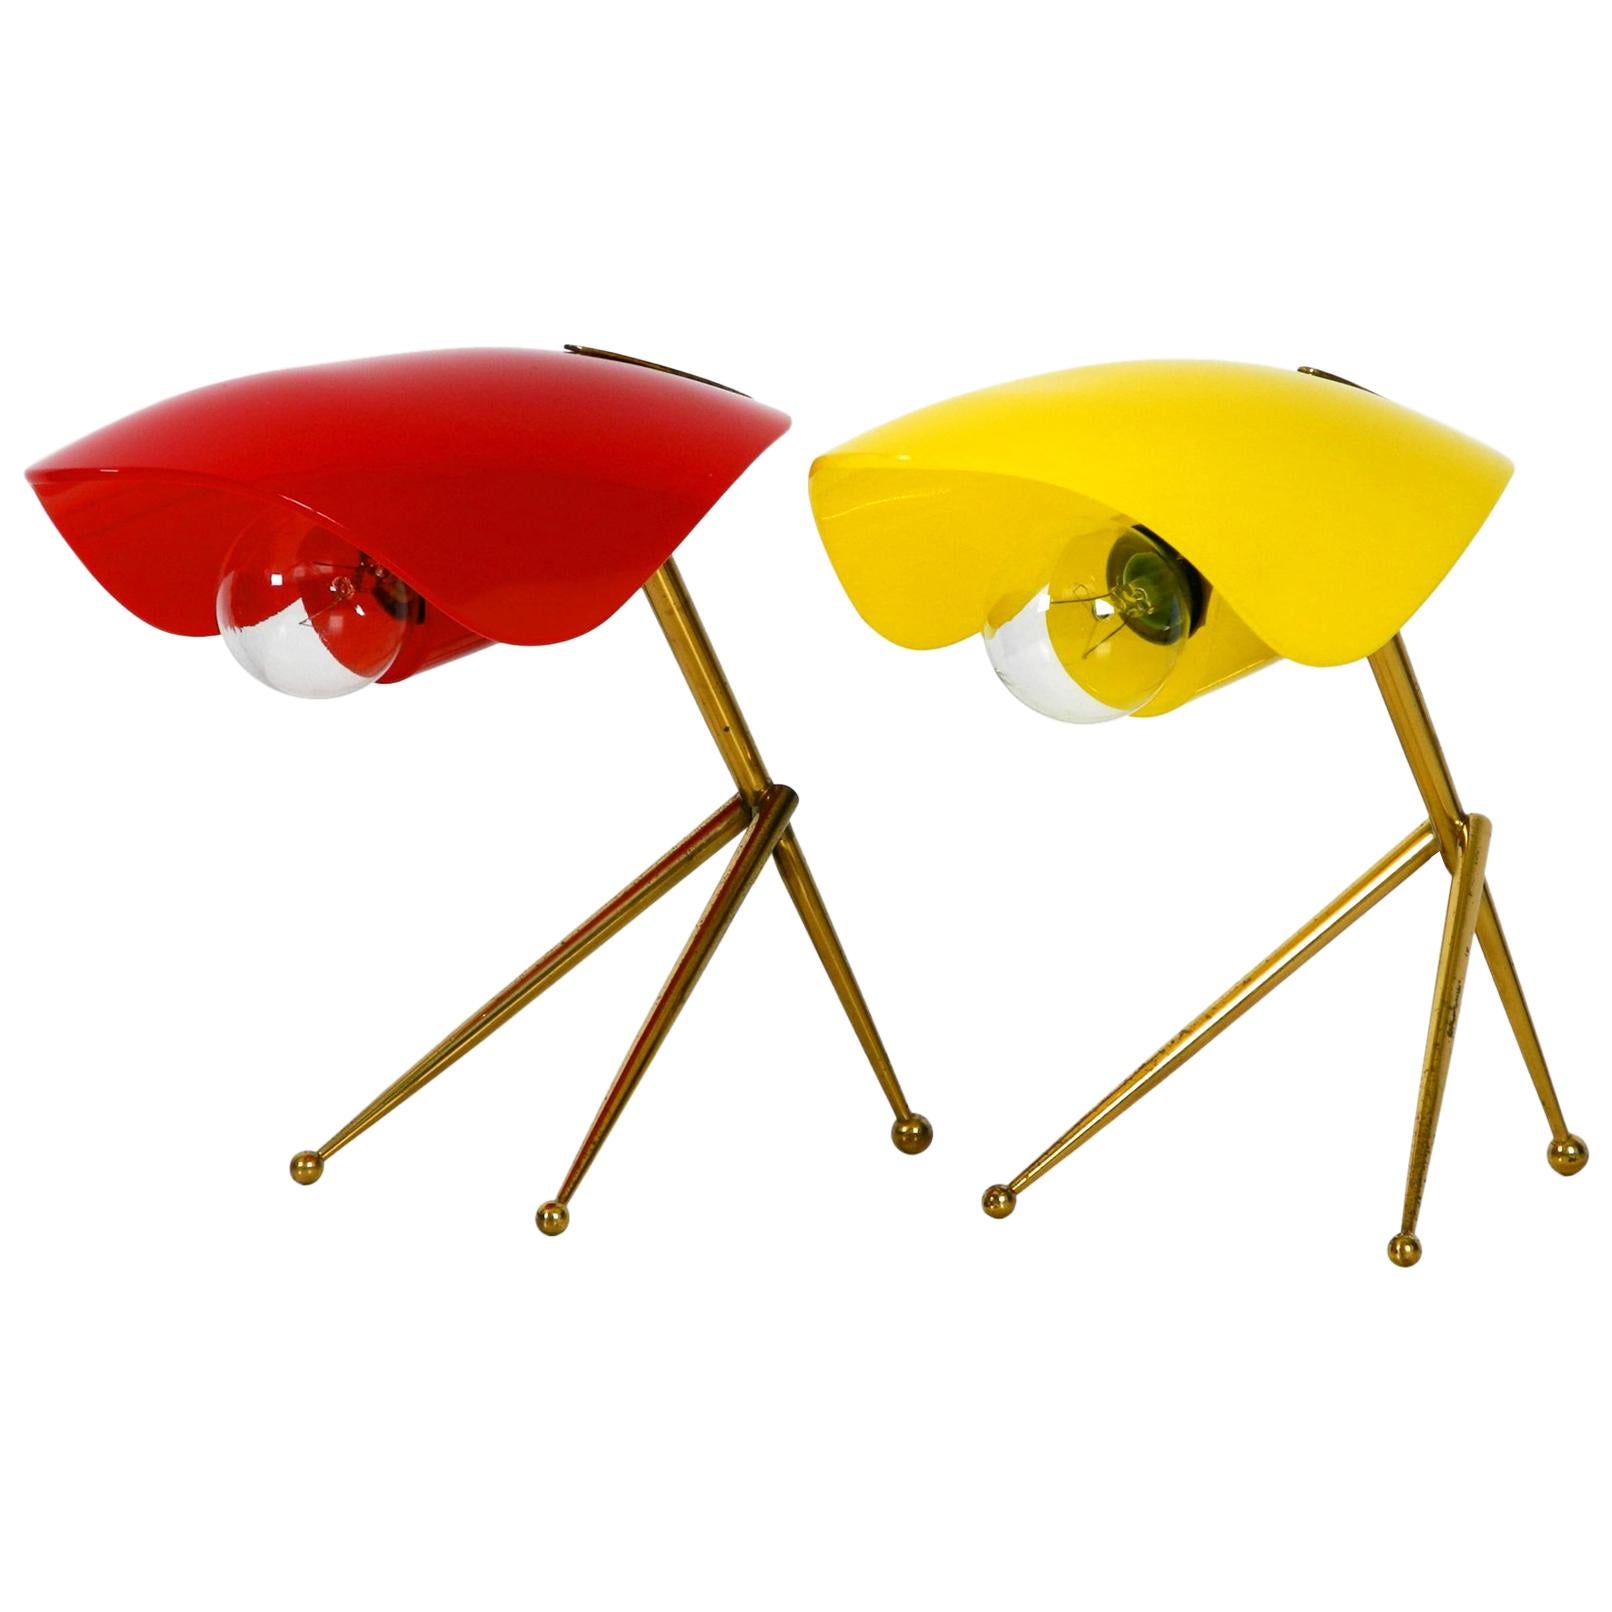 Pair of Rare Midcentury Table Lamps by WKR Germany with Plexiglass Lampshades For Sale